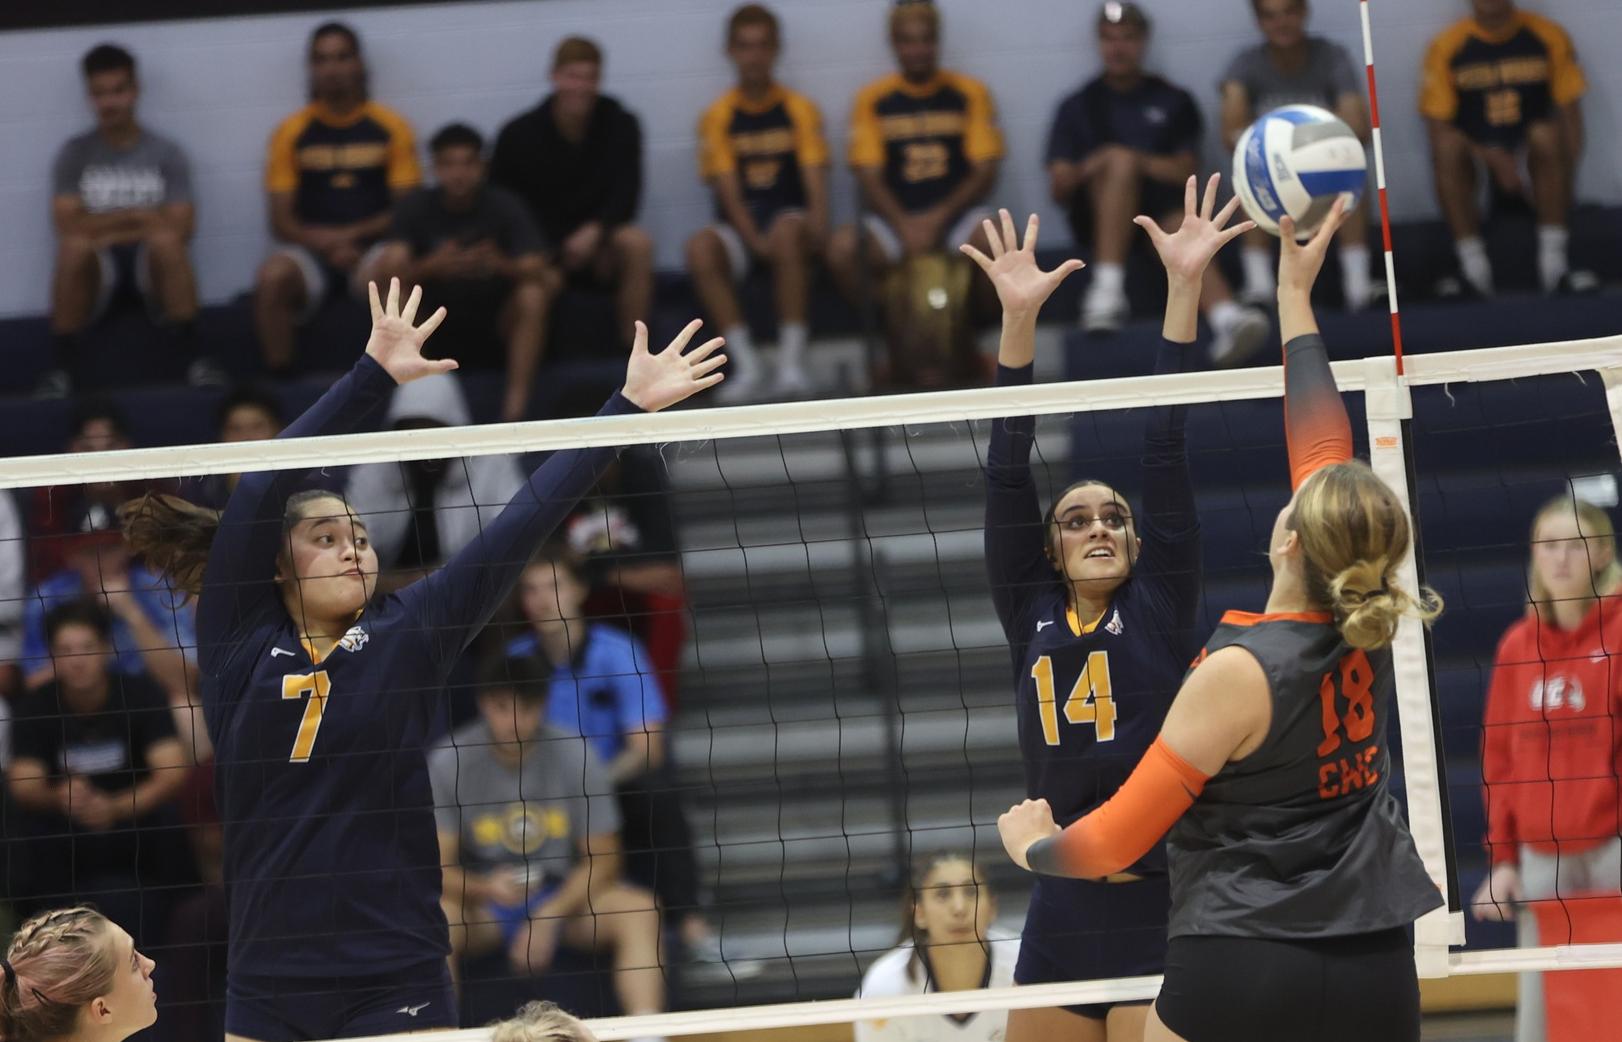 WNCC volleyball splits contests on Saturday